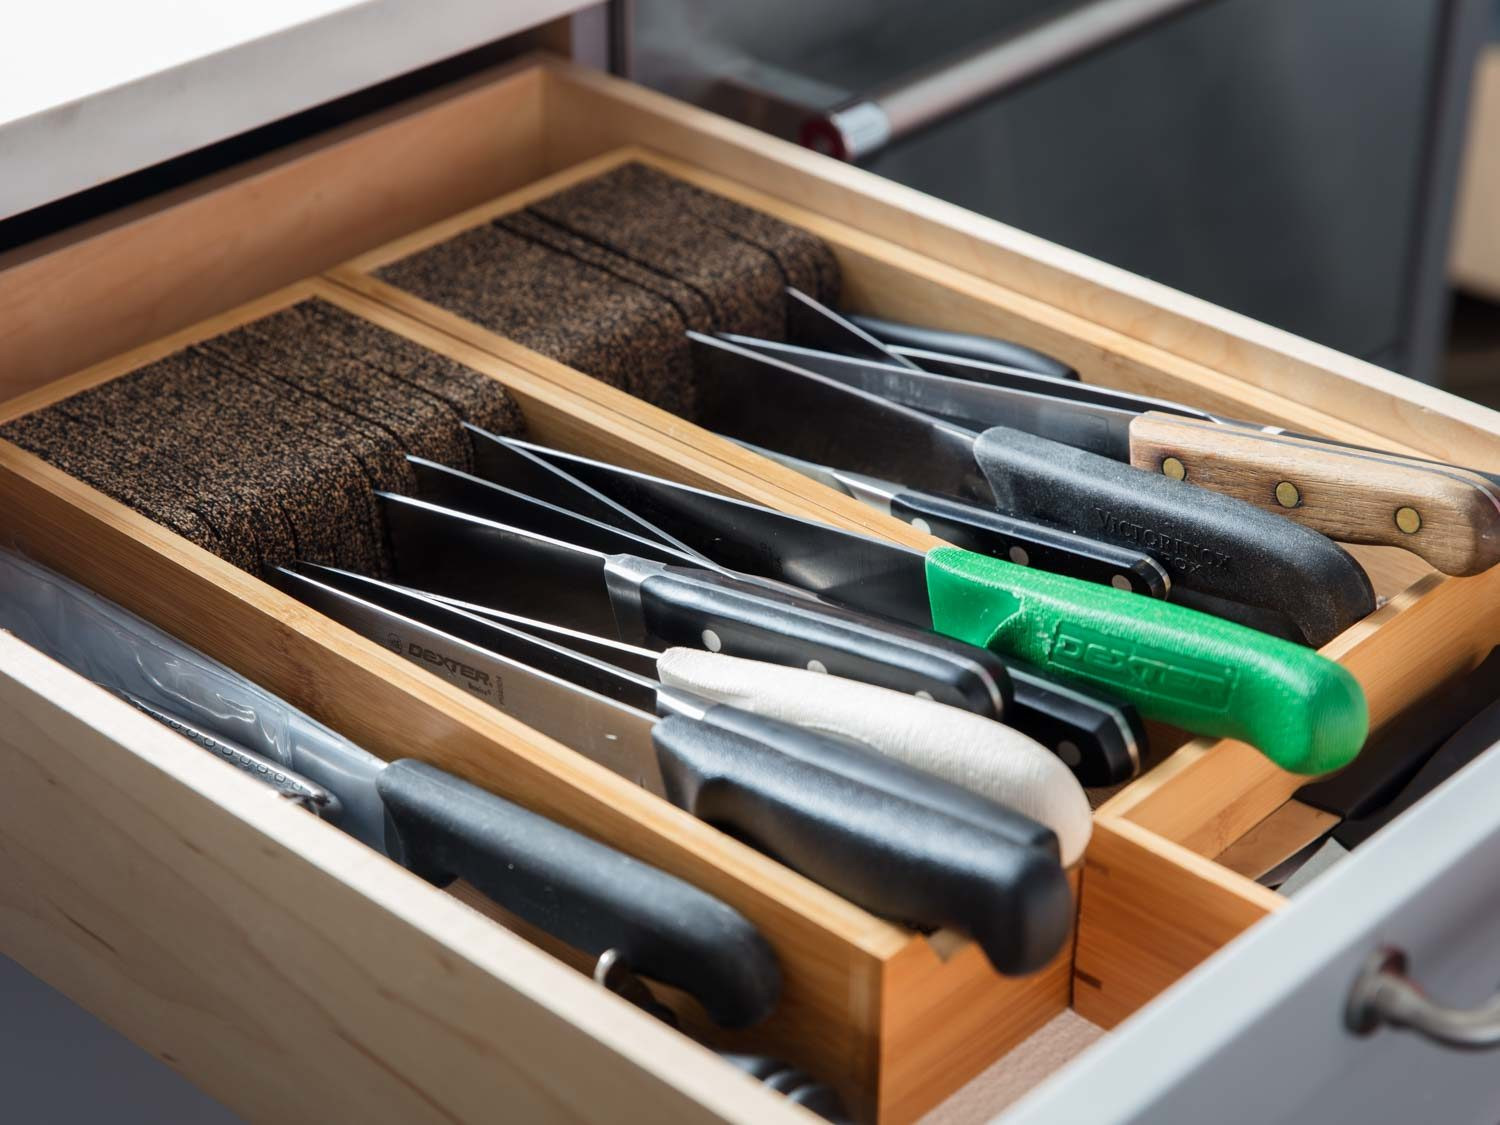 Kitchen Drawer Knife Organizer
 The Best Way to Store Your Knives